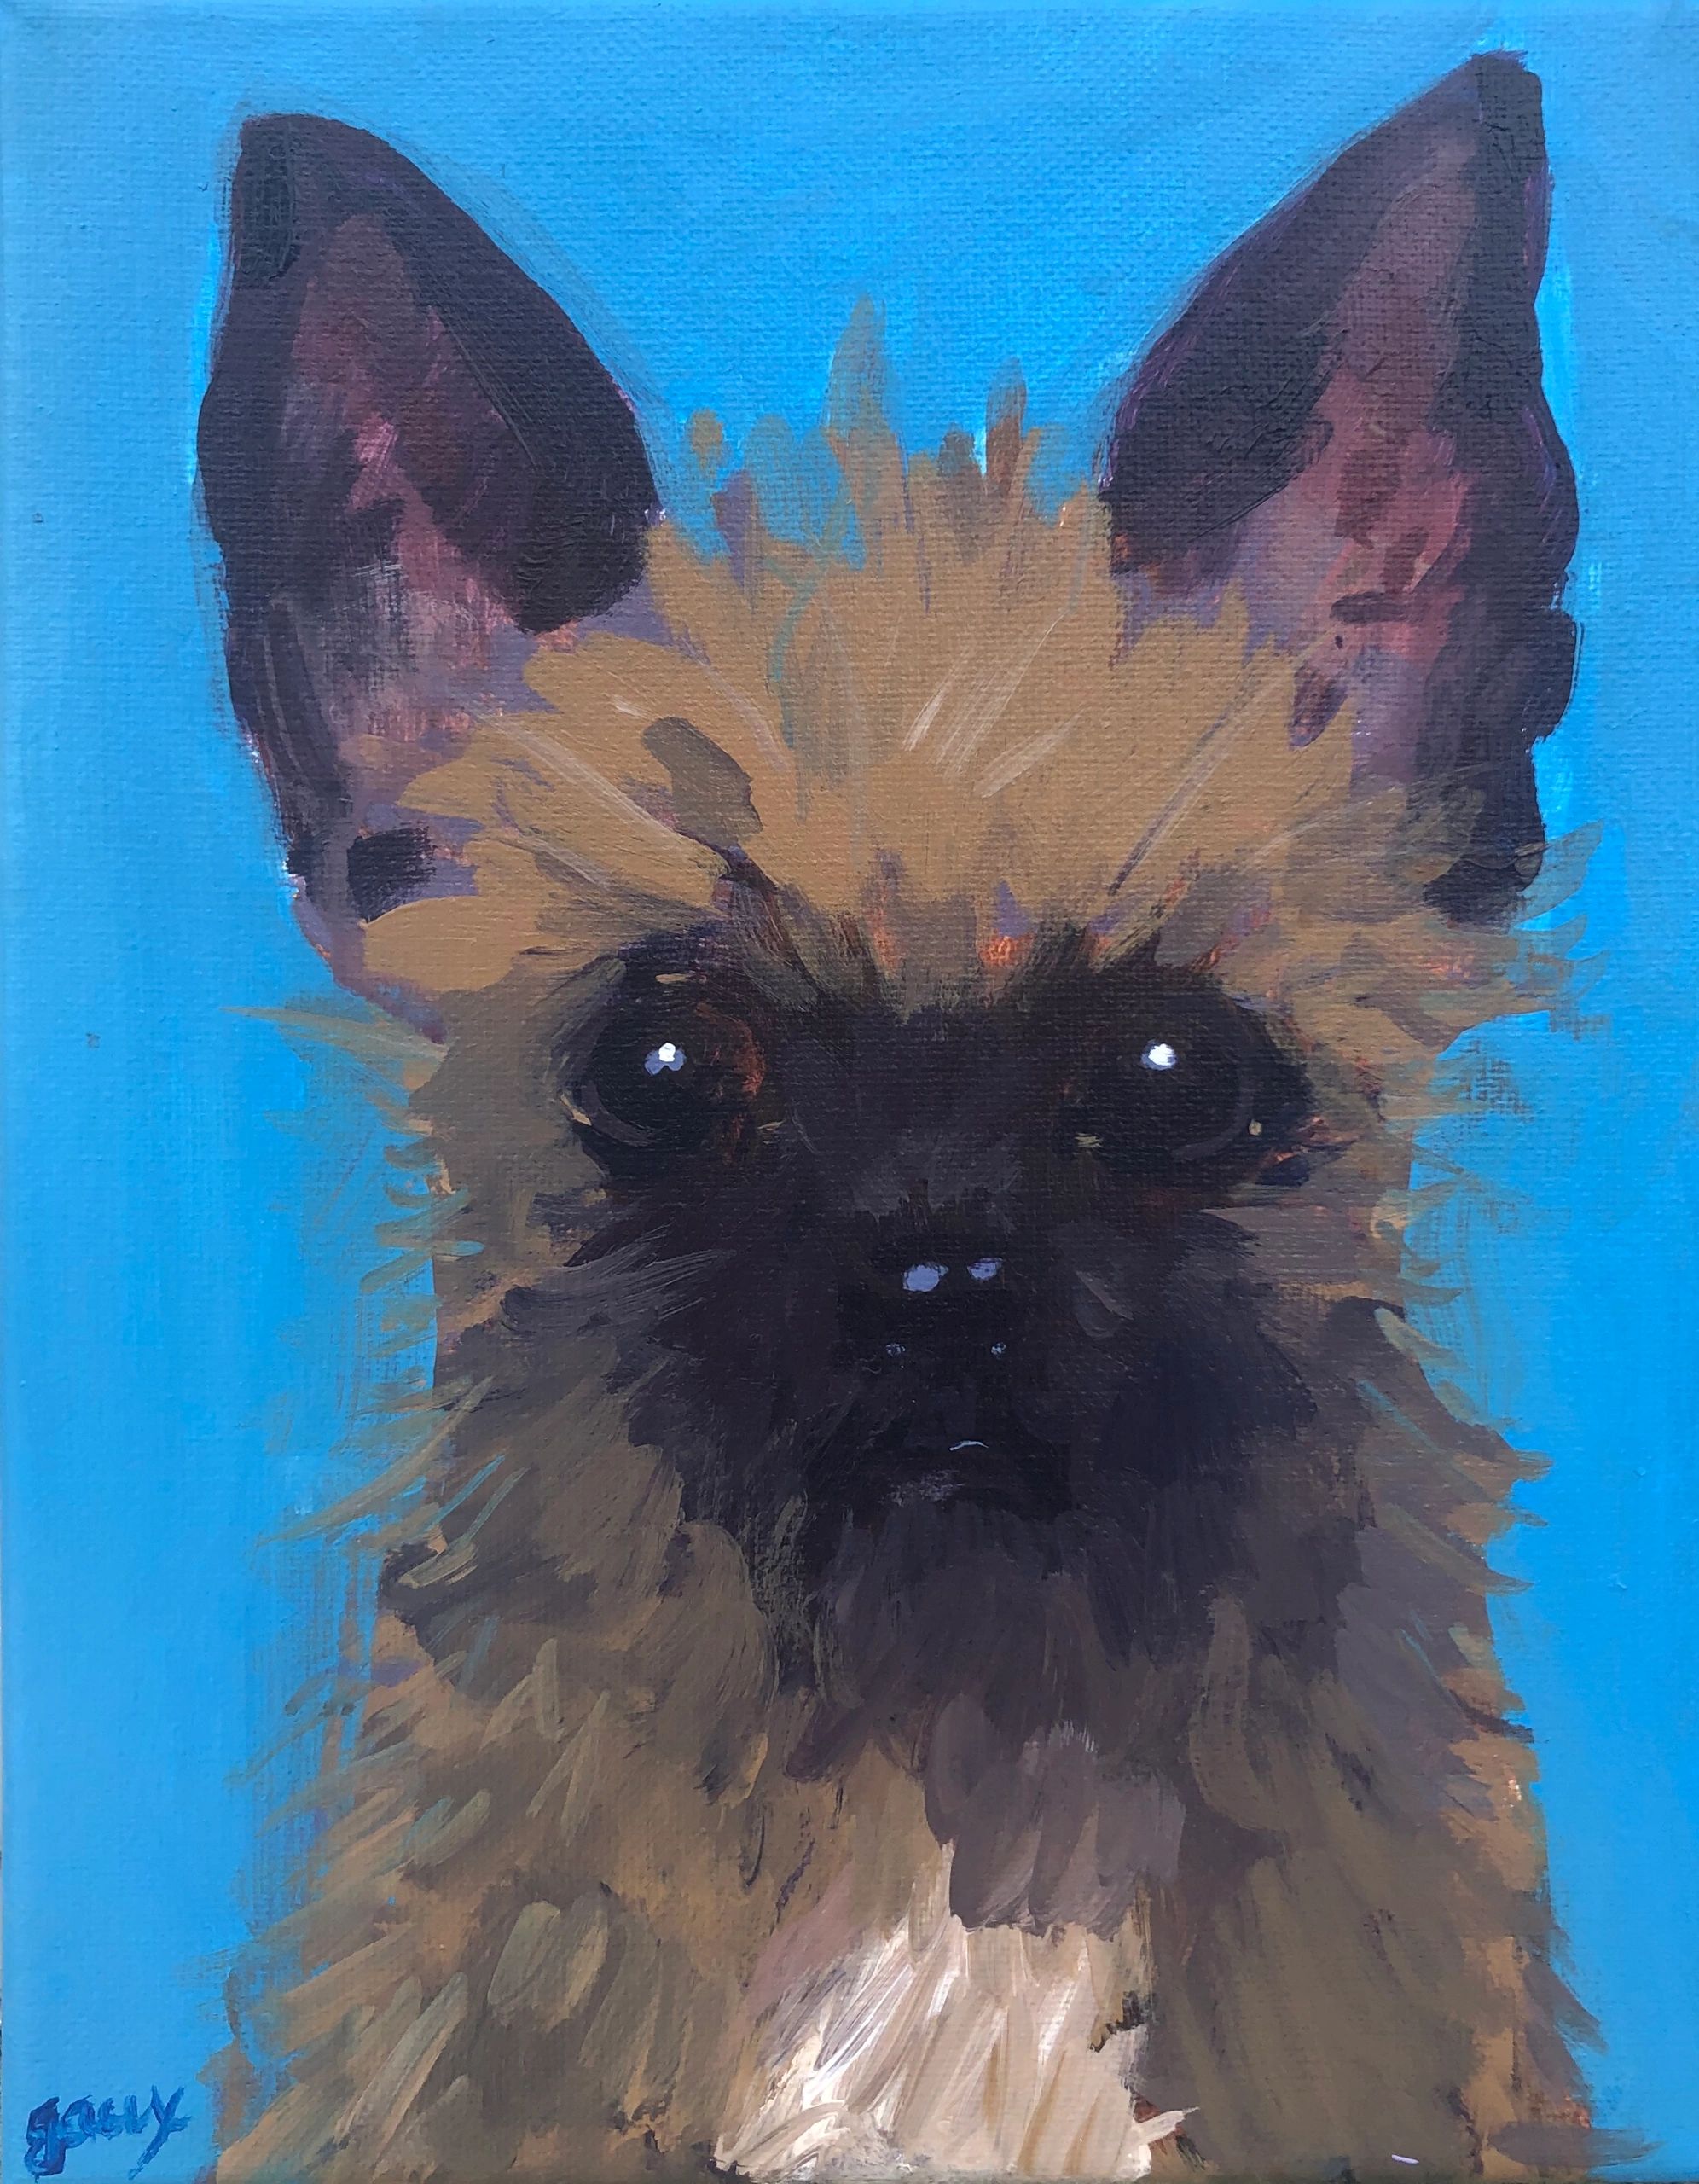 Get A Special Original Painting Of Your Dog By Artists Margaux Hymel